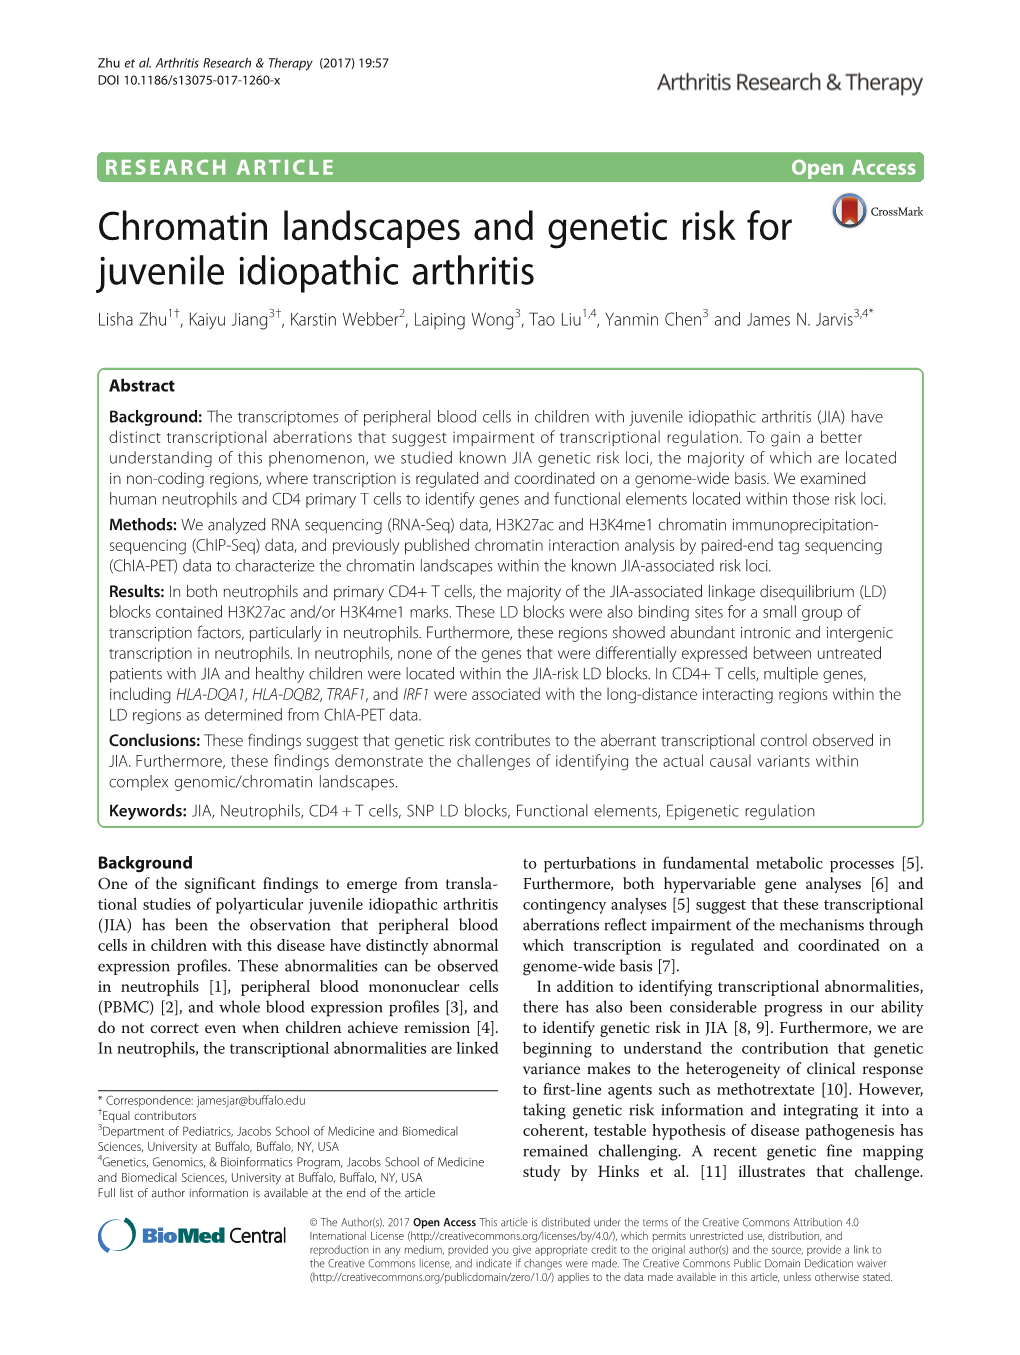 Chromatin Landscapes and Genetic Risk for Juvenile Idiopathic Arthritis